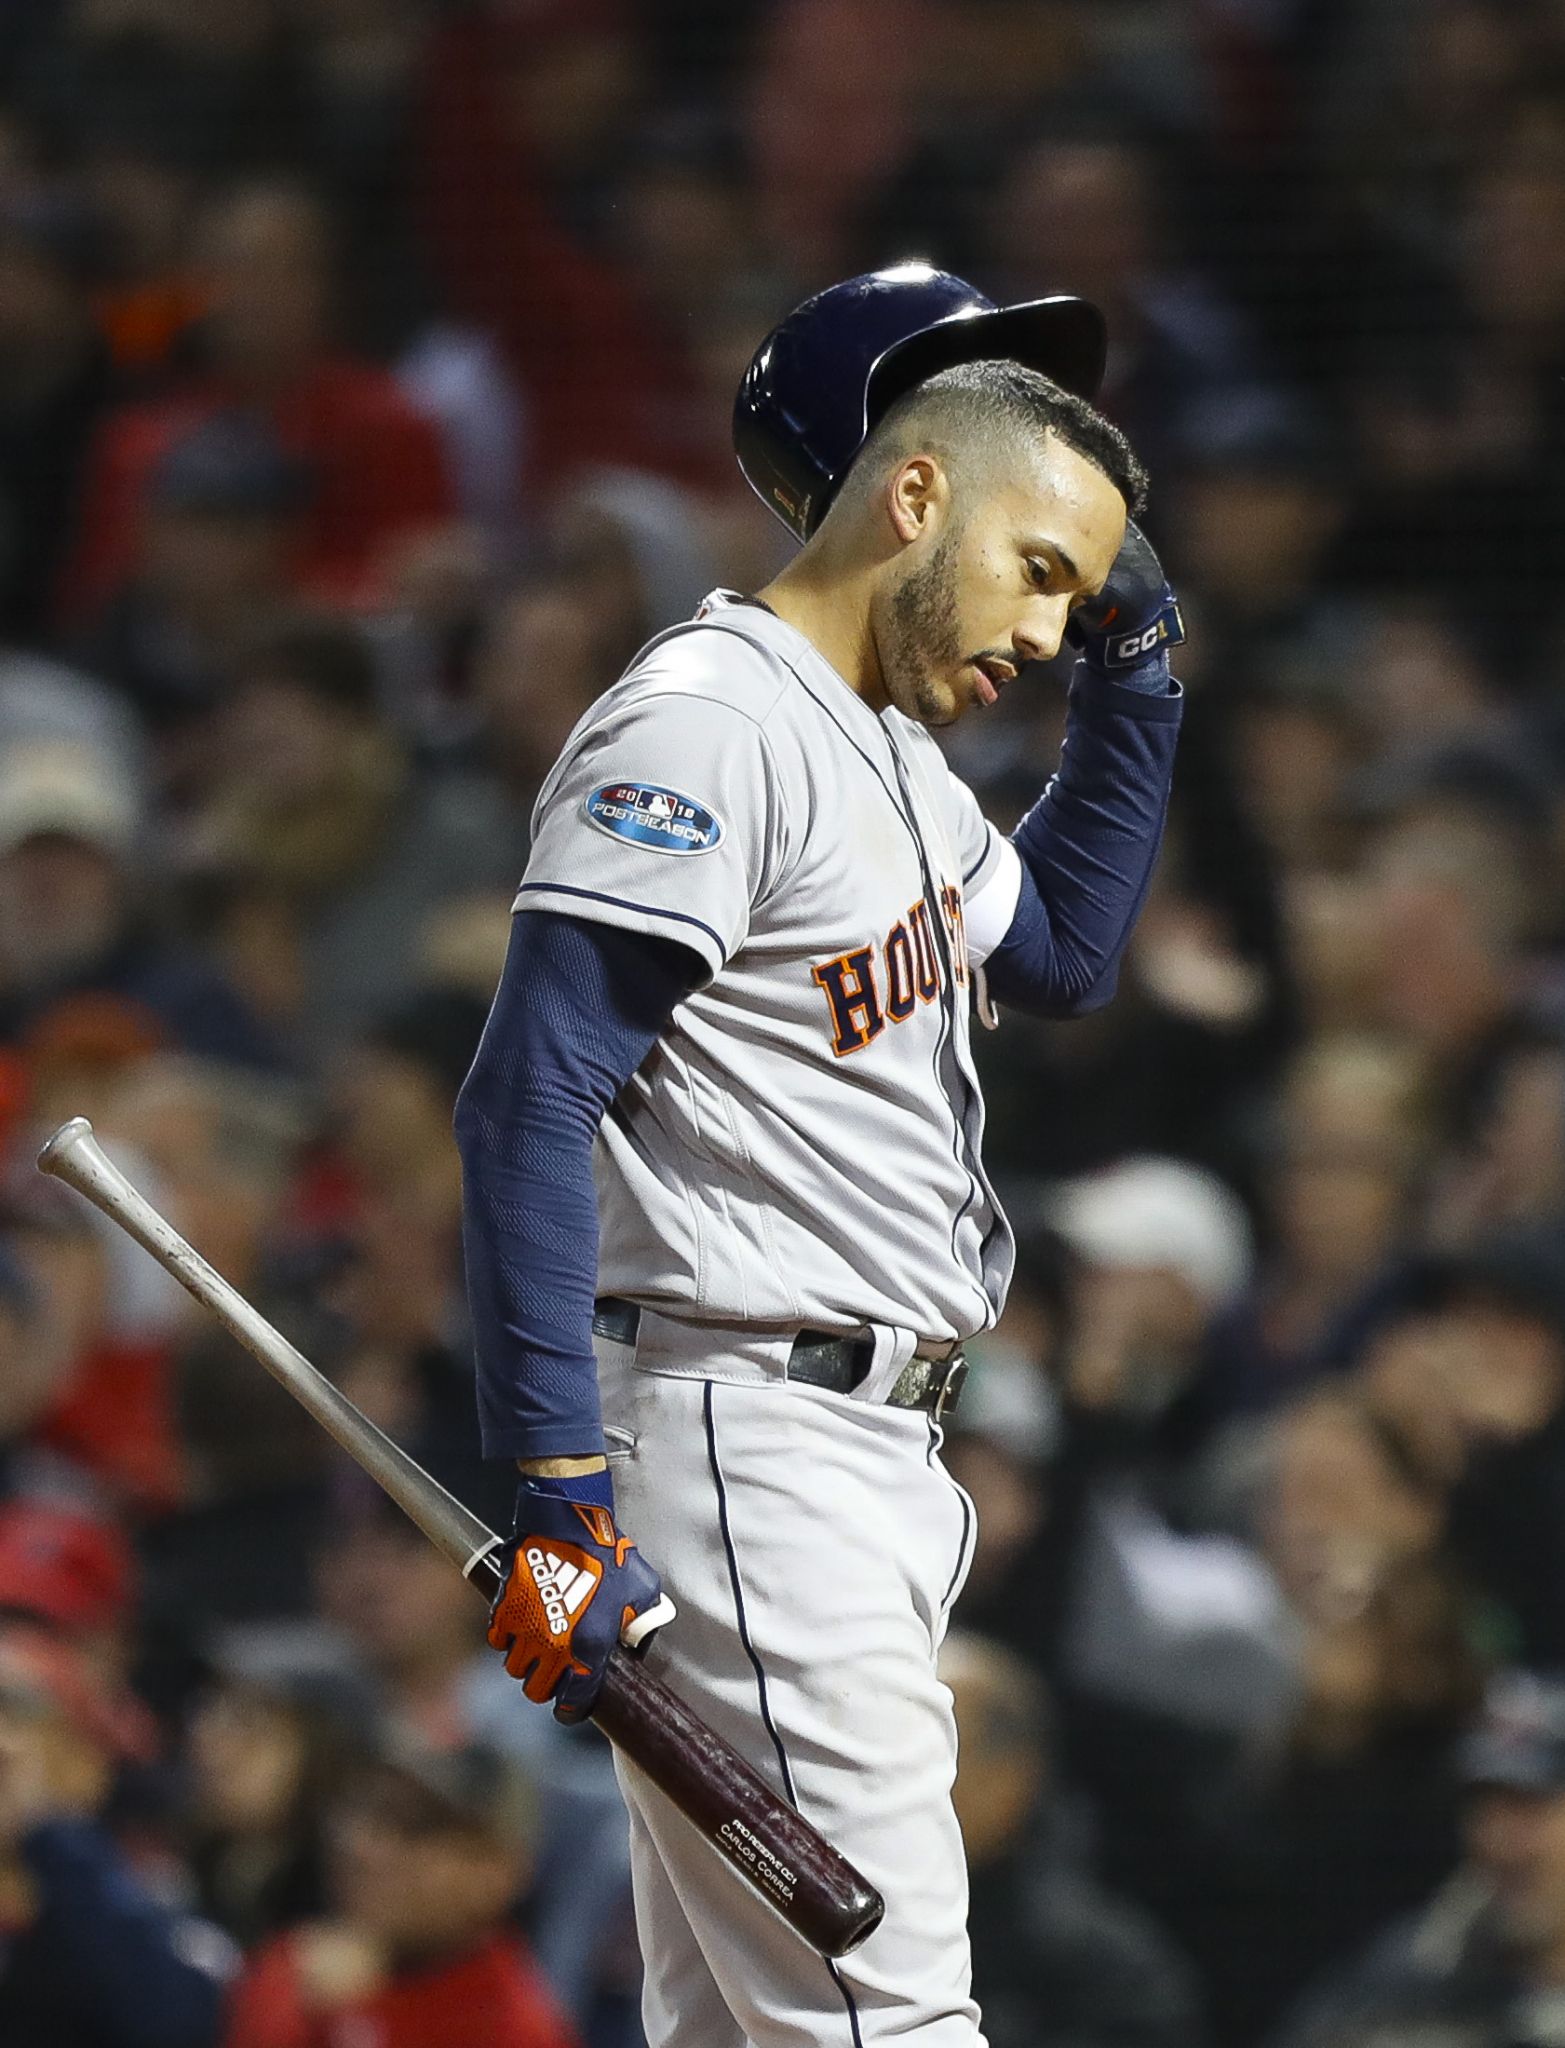 Astros' Jose Altuve could be used as DH; Marwin Gonzalez likely to